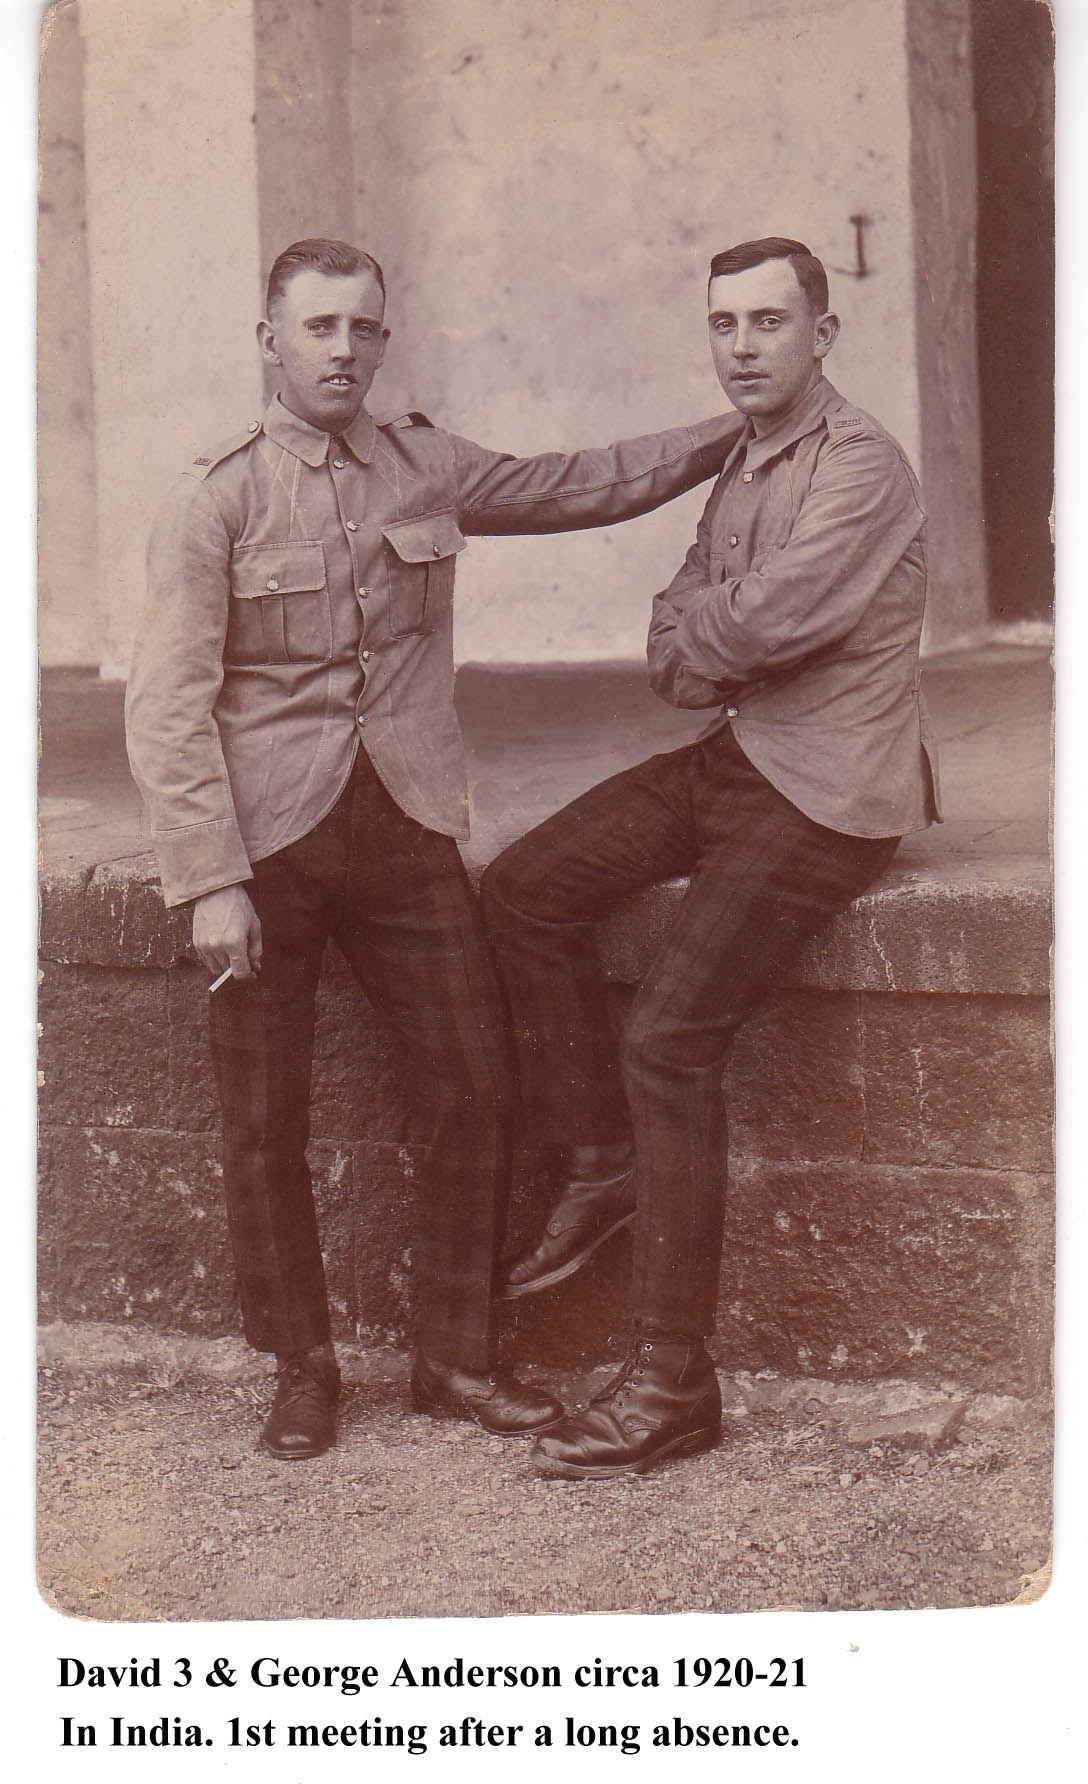 Dave 3 & George Anderson India 1920-21